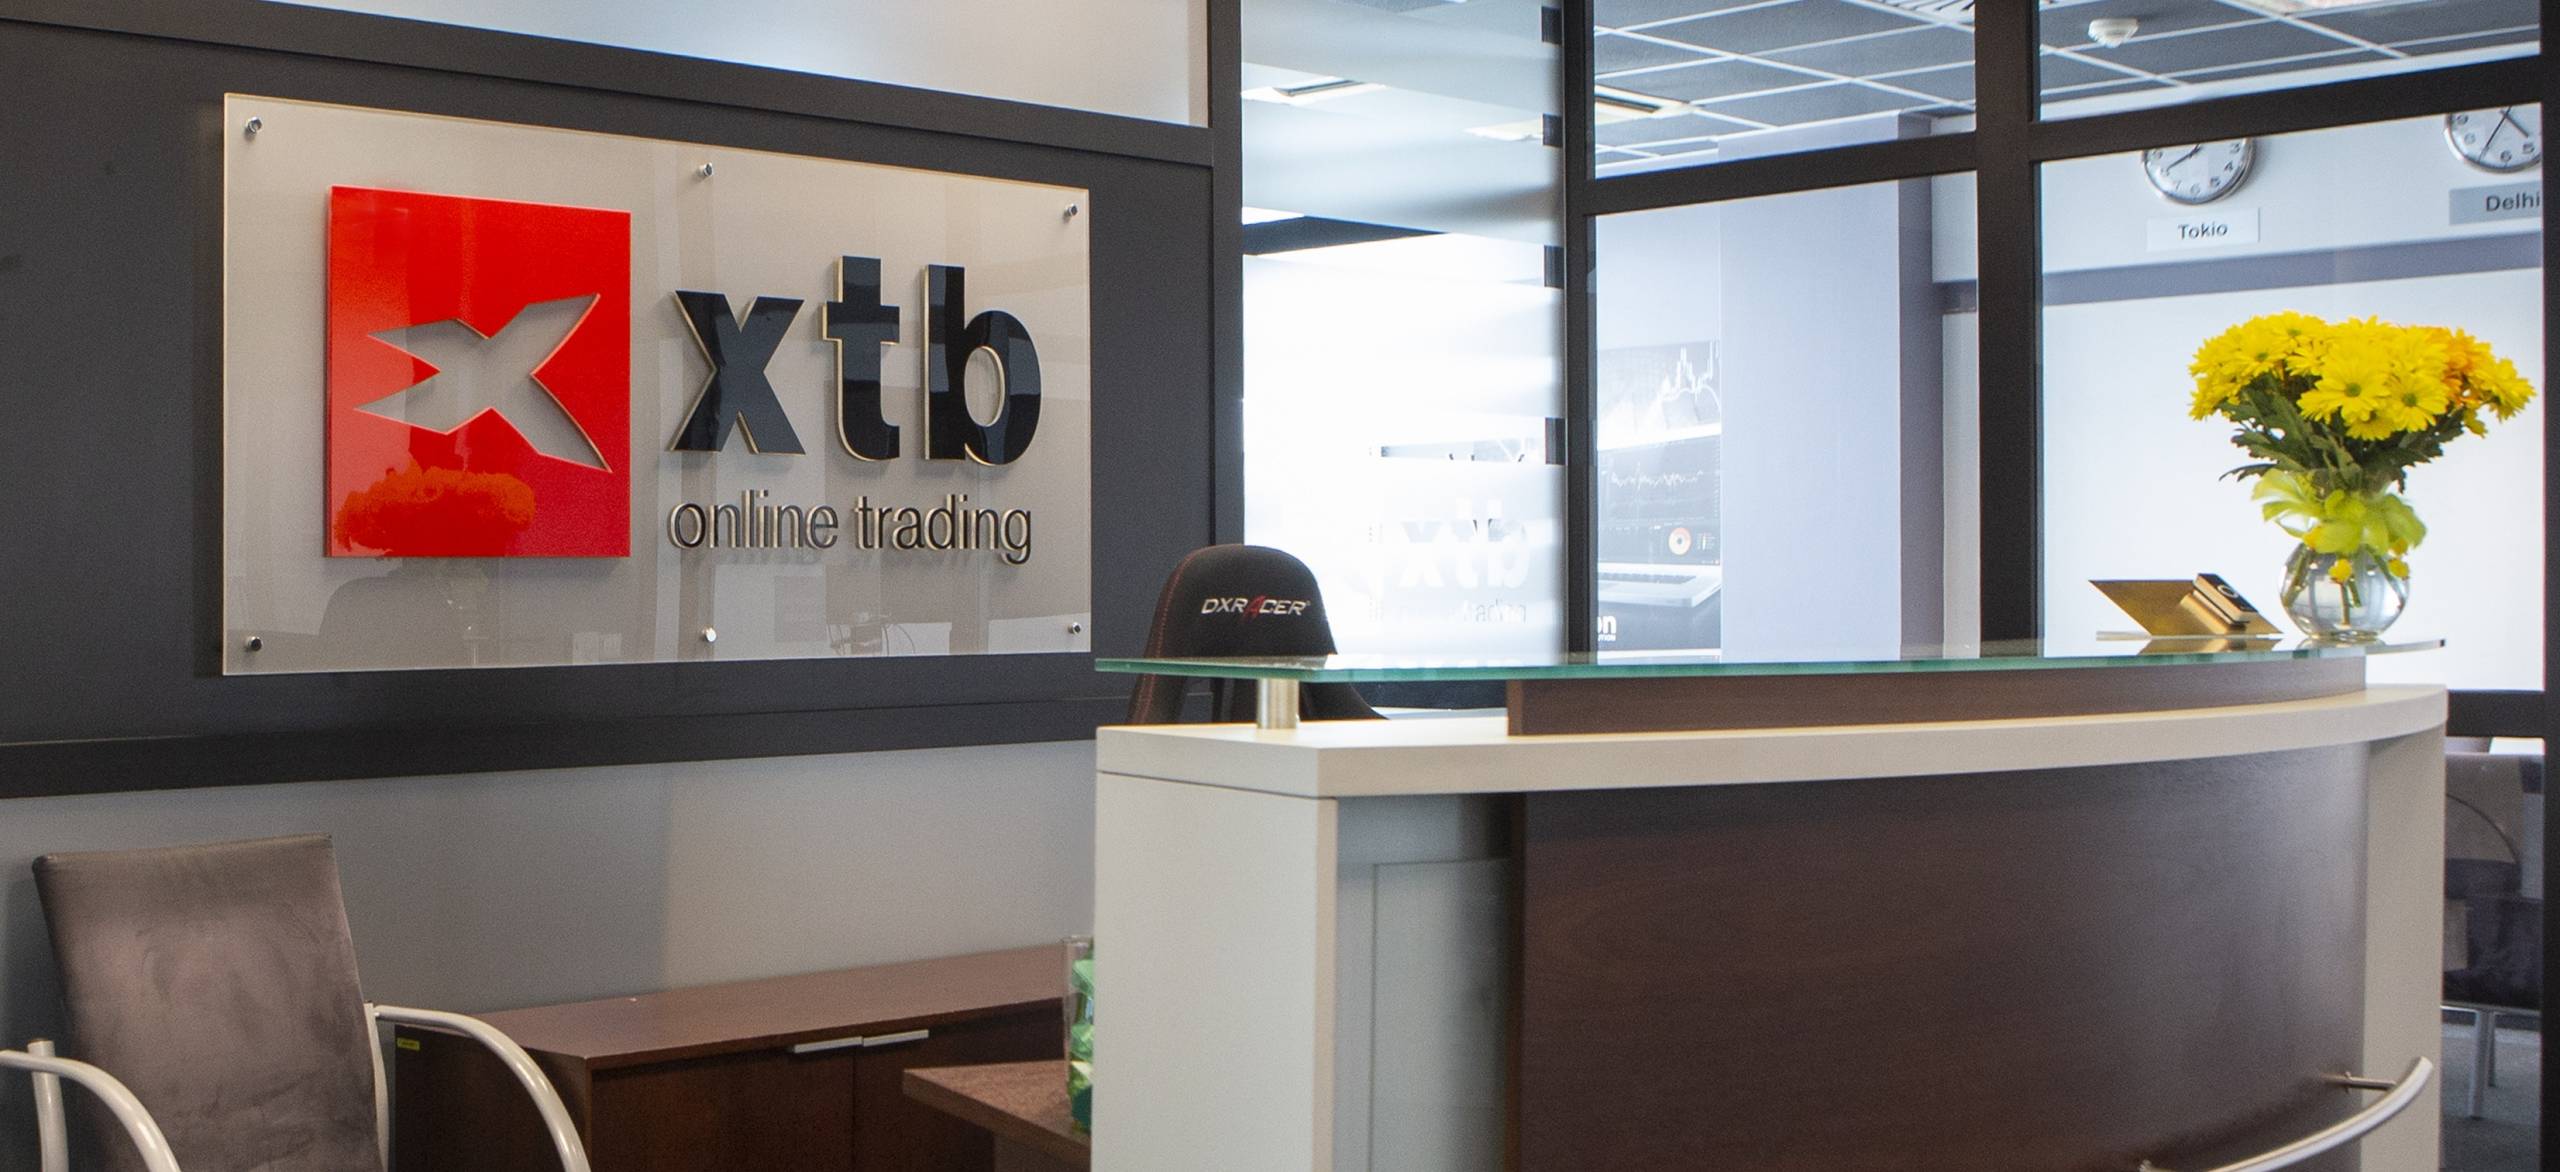 XTB achieves over one million customers amid fintech advancements